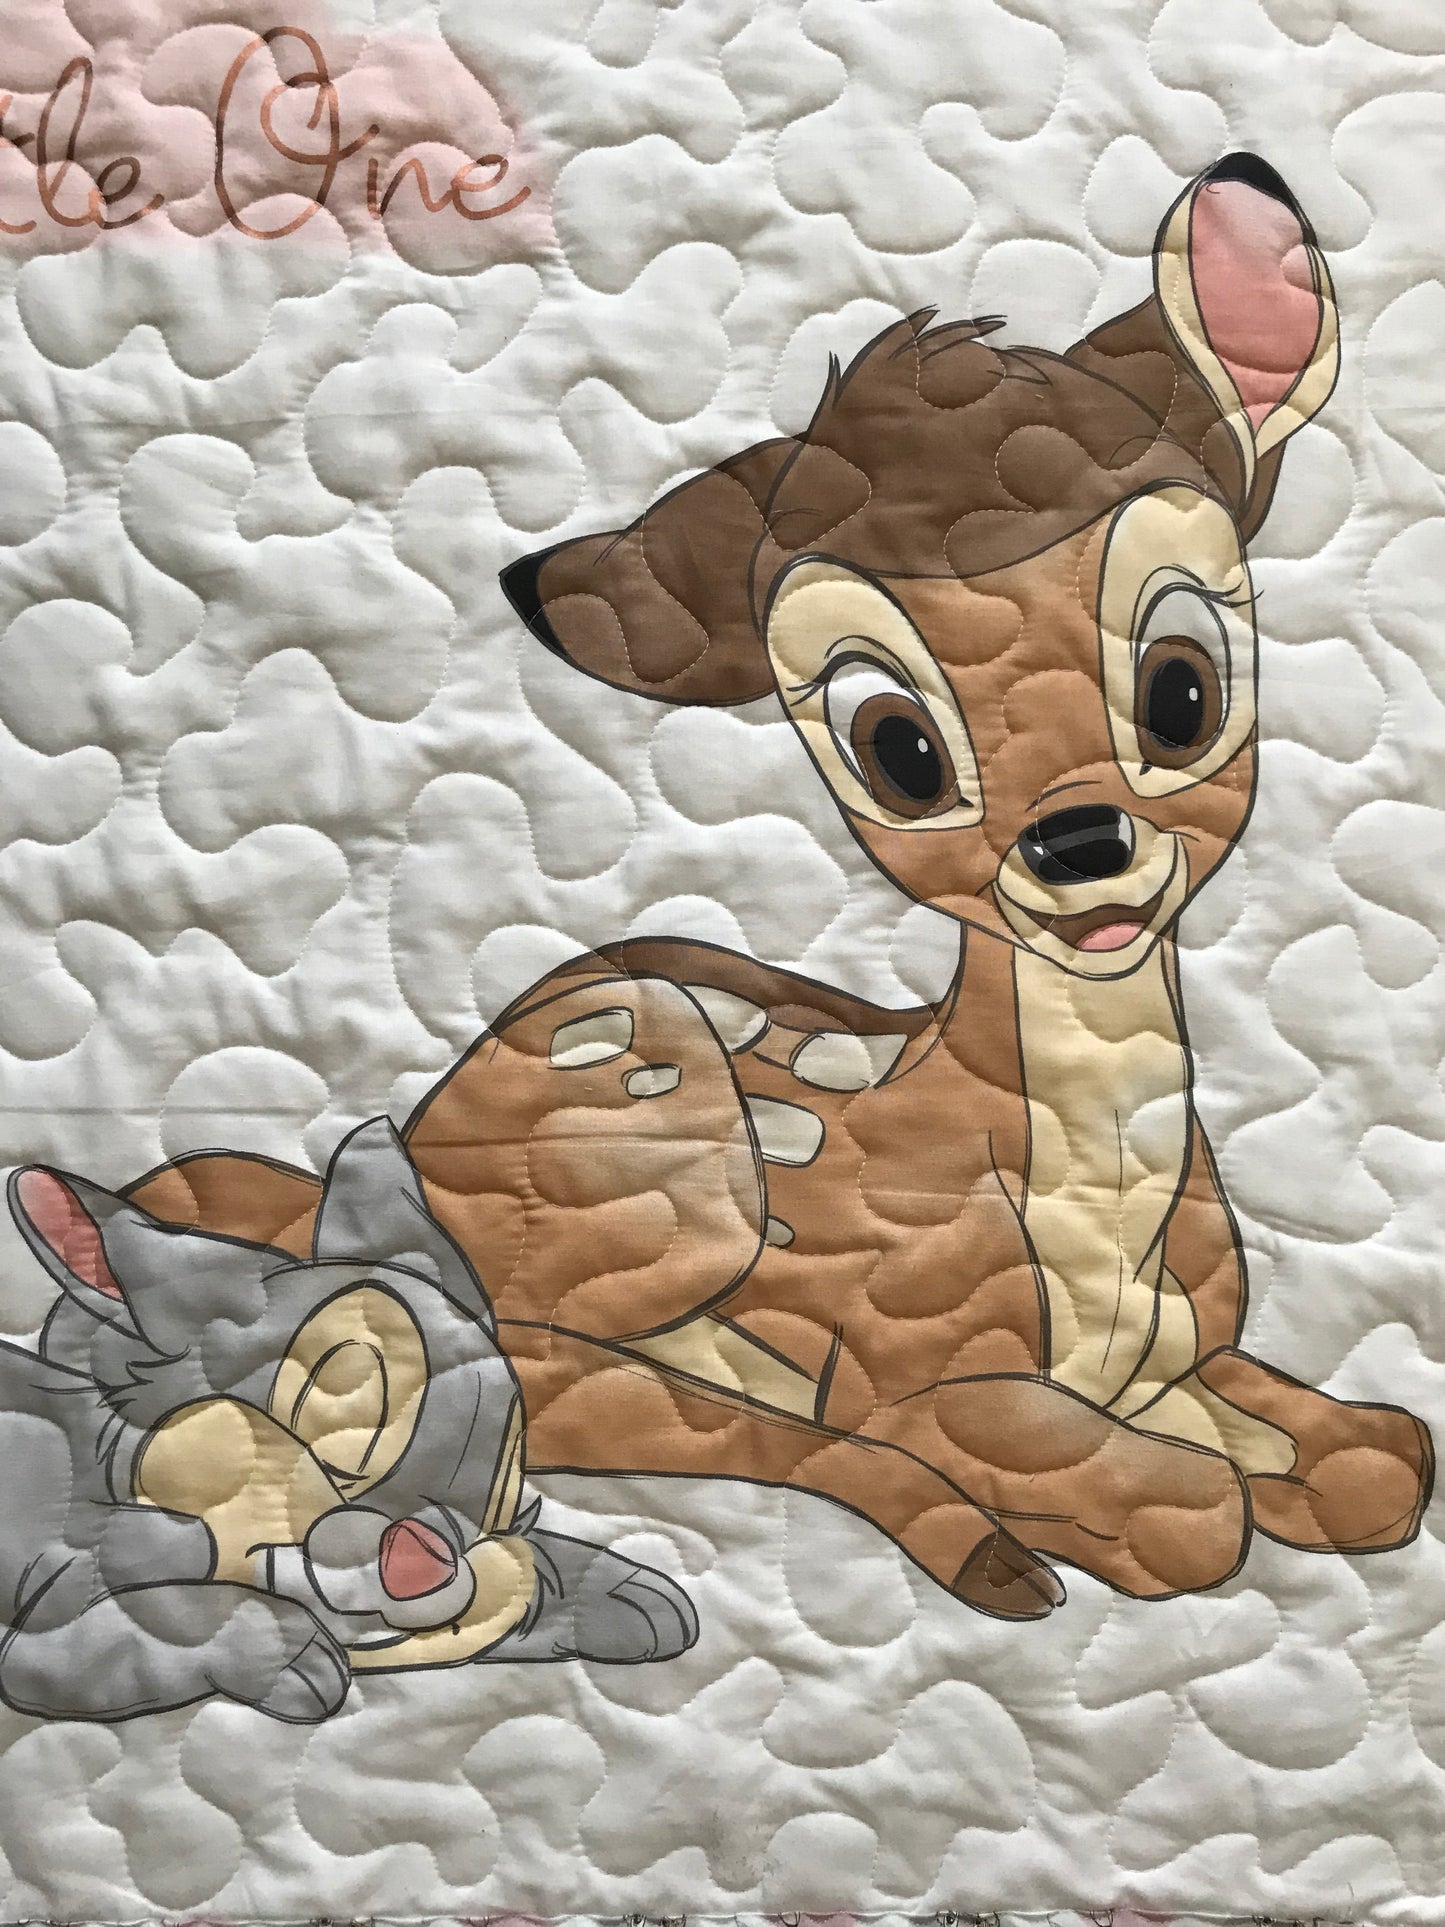 BAMBI & THUMPER Inspired 'DREAM BIG LITTLE ONE" Quilted Blanket